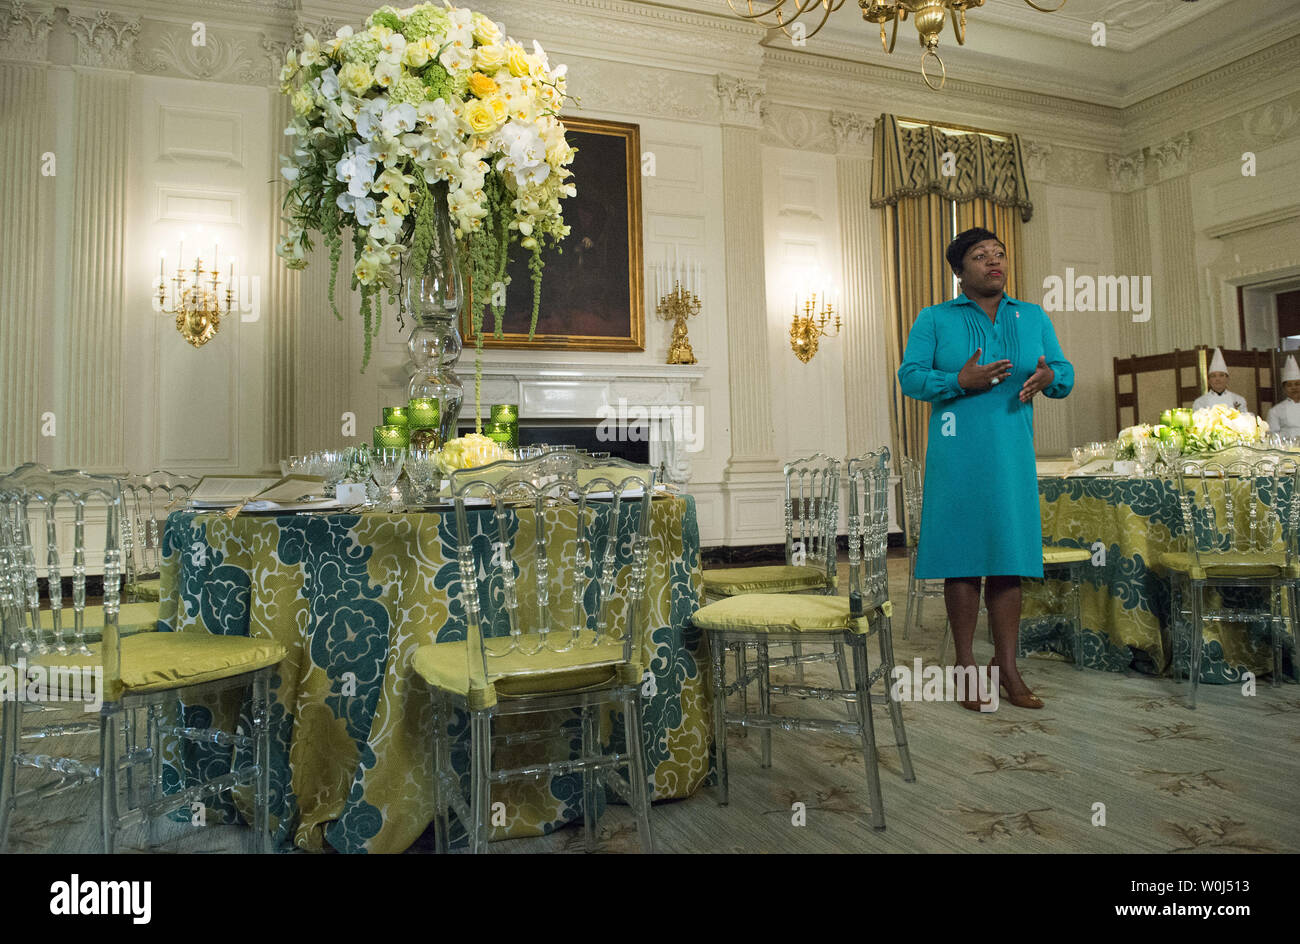 Deesha Dyer, White House Social Secretary, speaks about the upcoming Canada State Dinner during a preview in the State Dinning room at the White House in Washington, D.C. on March 9, 2016. President Obama and the First Lady will welcome Canadian Prime Minister Justin Trudeau and his wife Sophie Gregoire Trudeau for an official state visit to the White House tomorrow. Photo by Kevin Dietsch/UPI Stock Photo